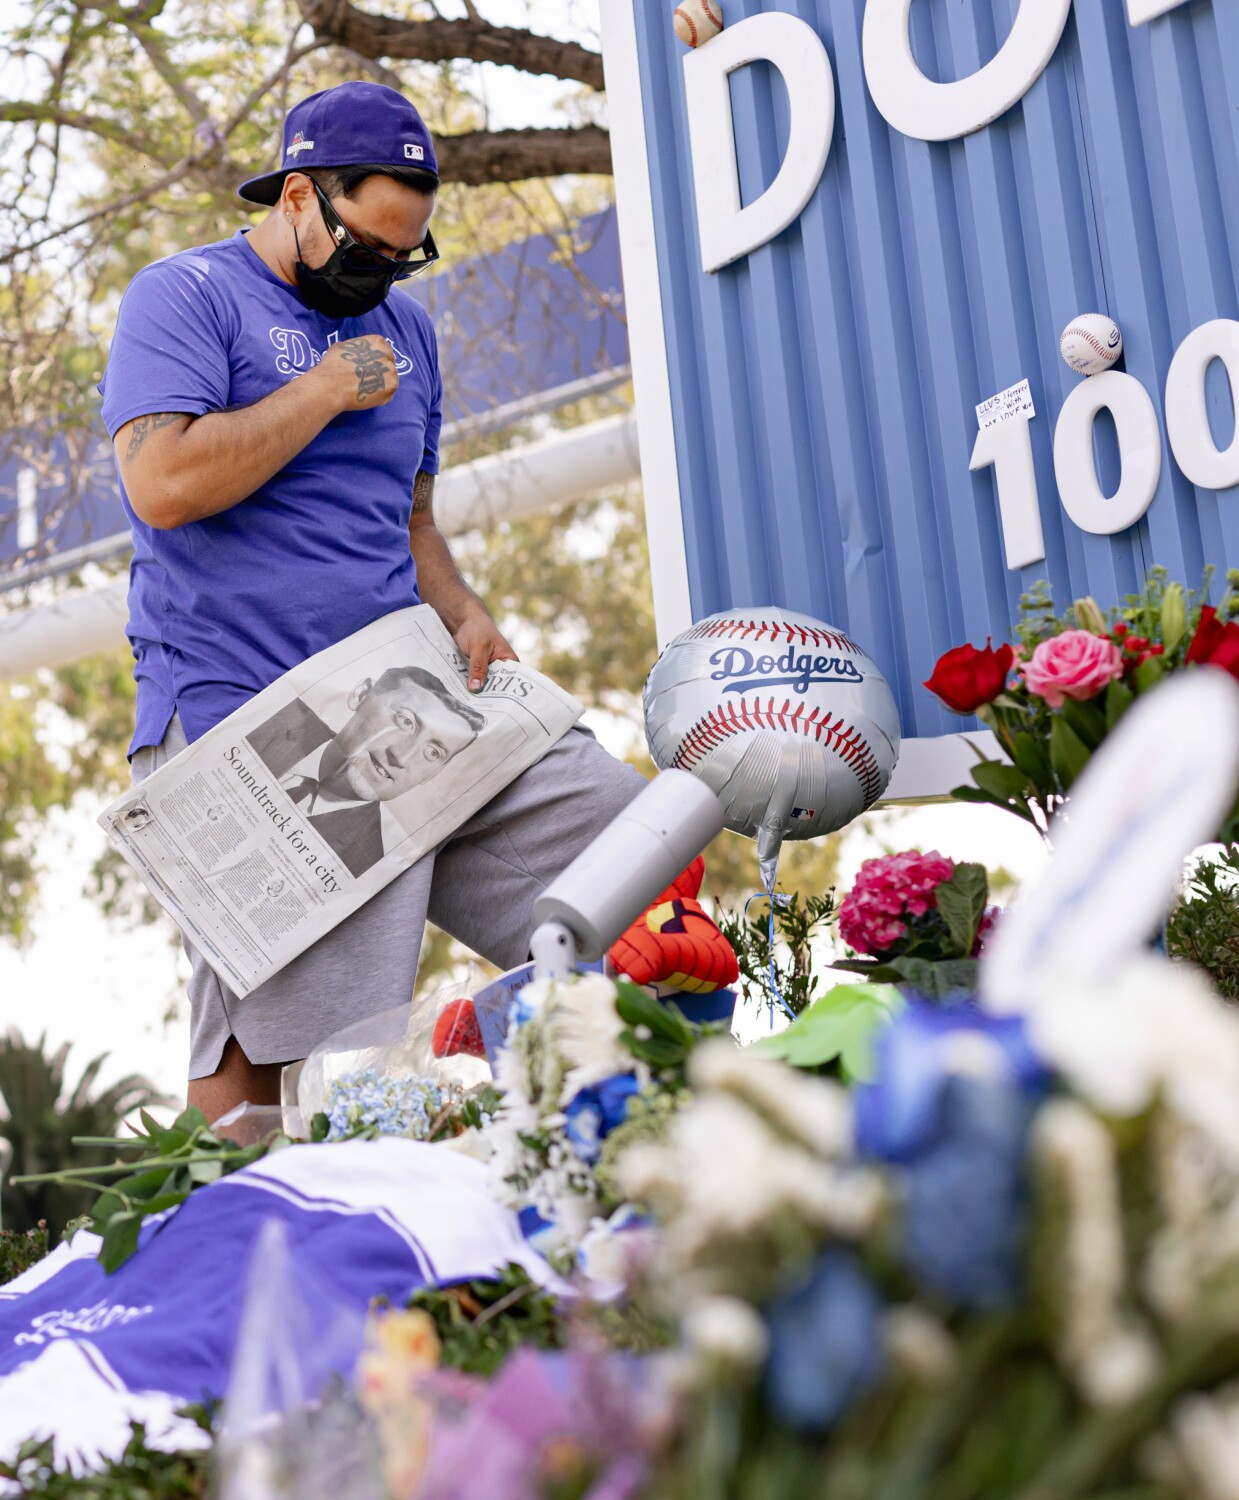 The Dodgers lost their voice when Vin Scully died. Angelenos lost a family member